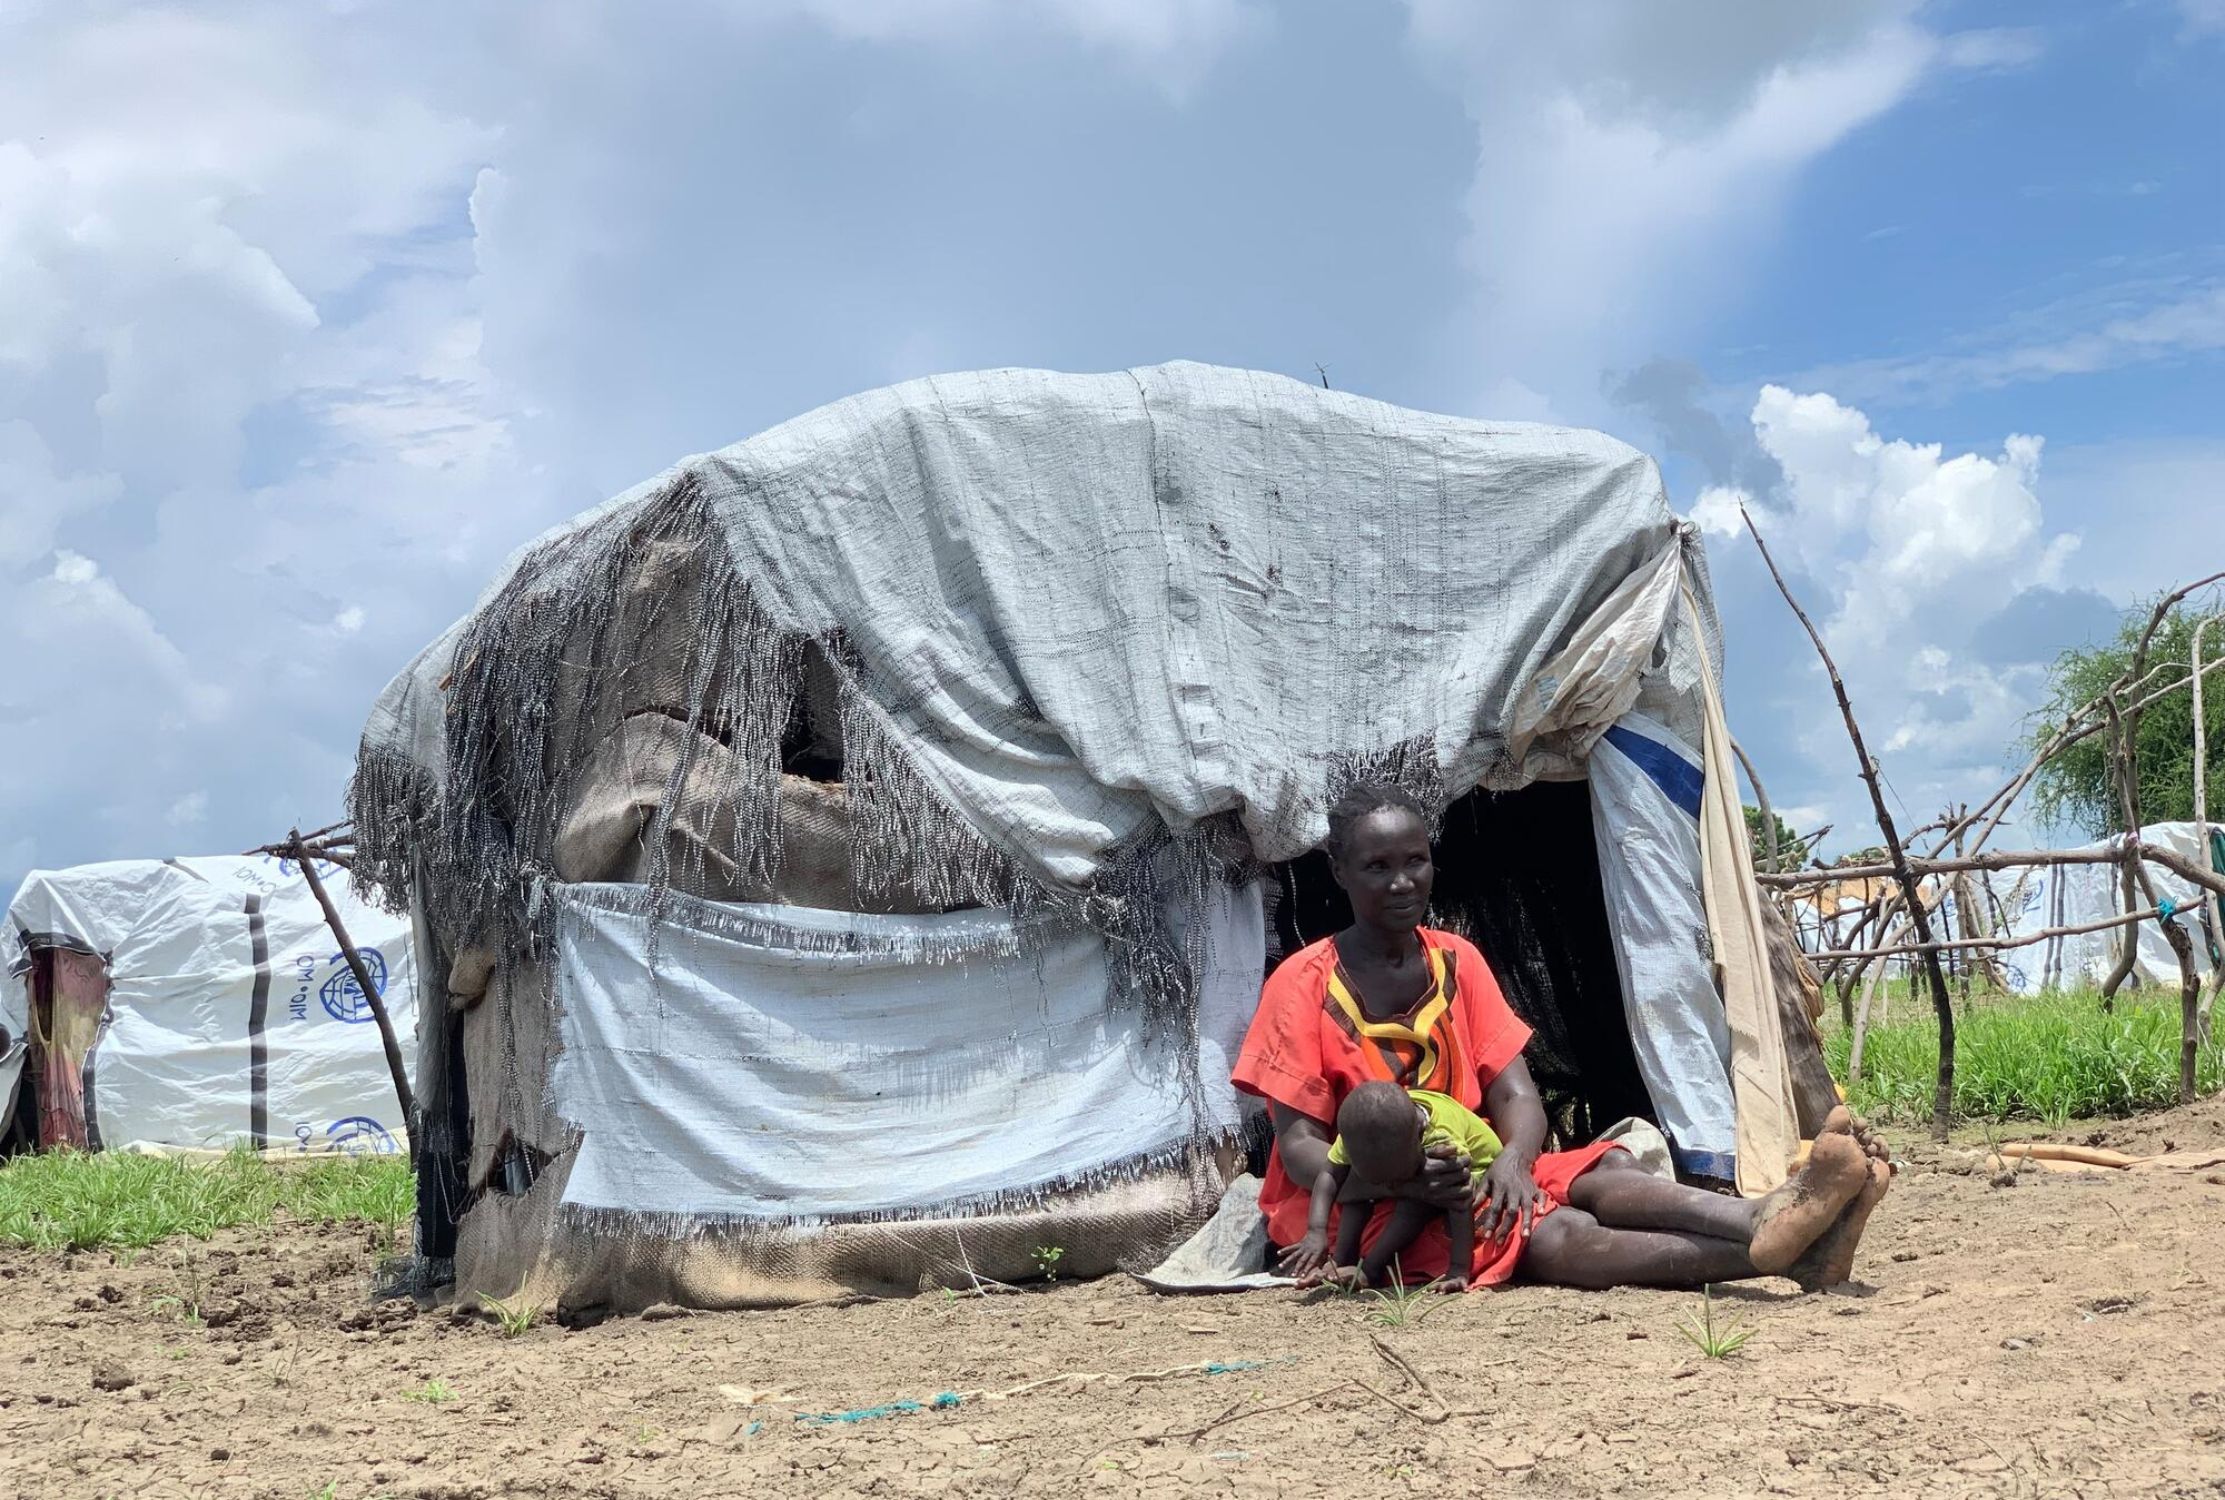 Aluel sits outside a makeshift home with her child in South Sudan